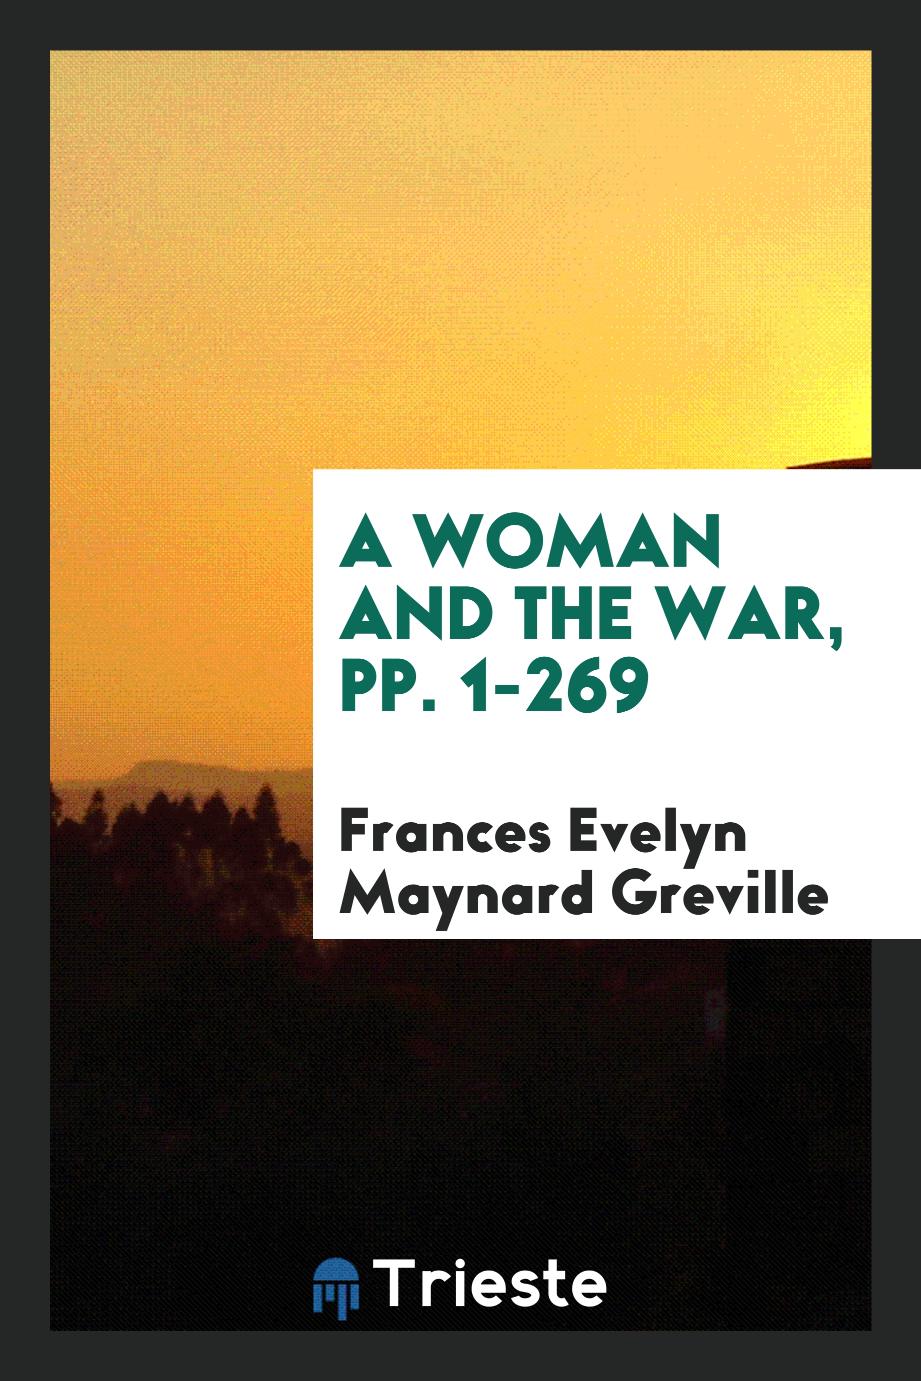 A Woman and the War, pp. 1-269